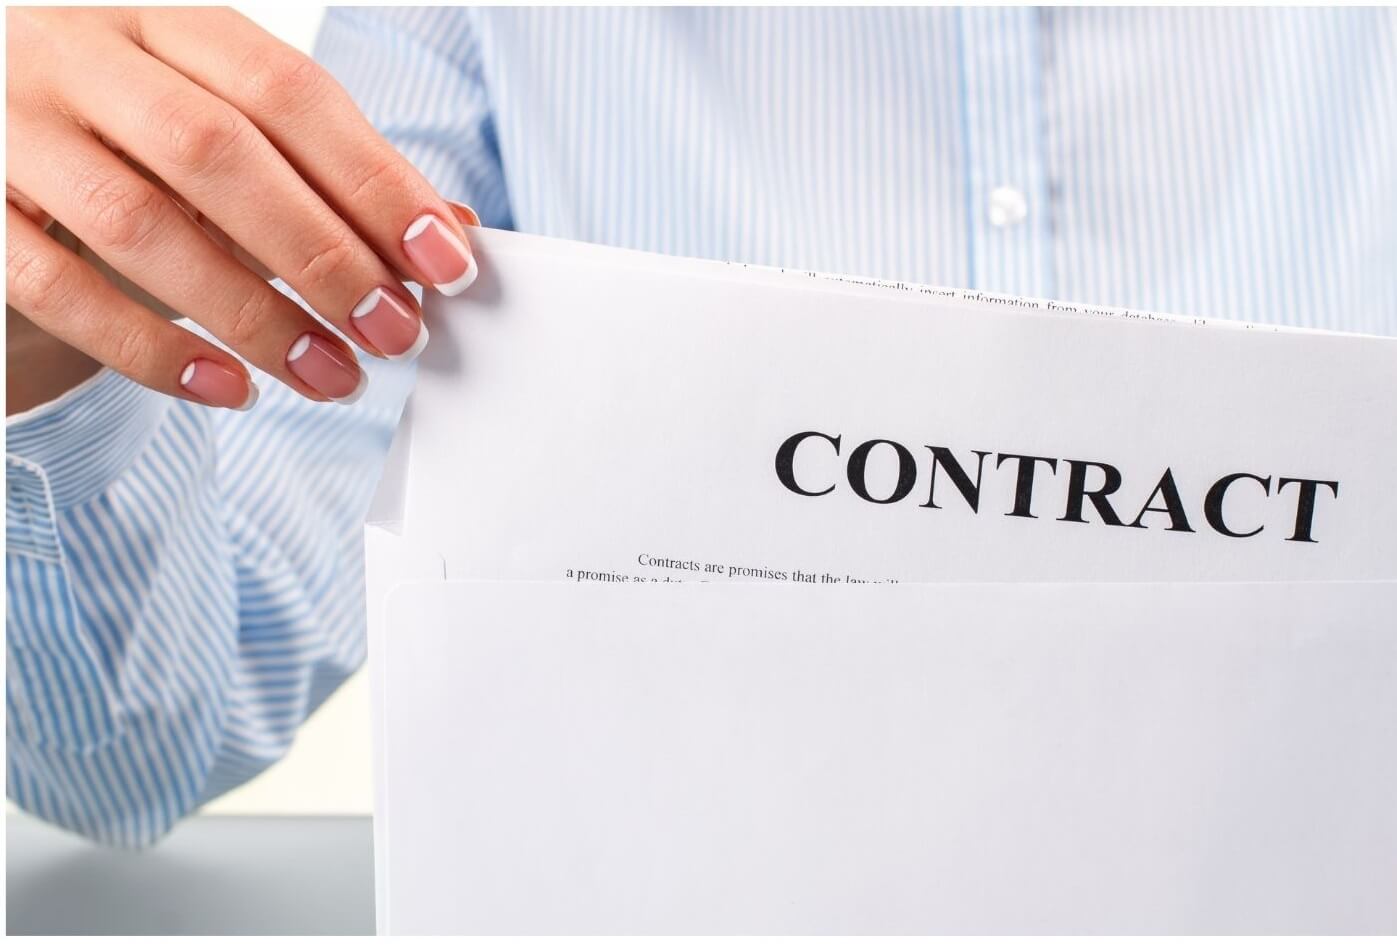 A woman with french nails manicure wearing a stripes pattern shirt takes the employee contract letter from a white envelope